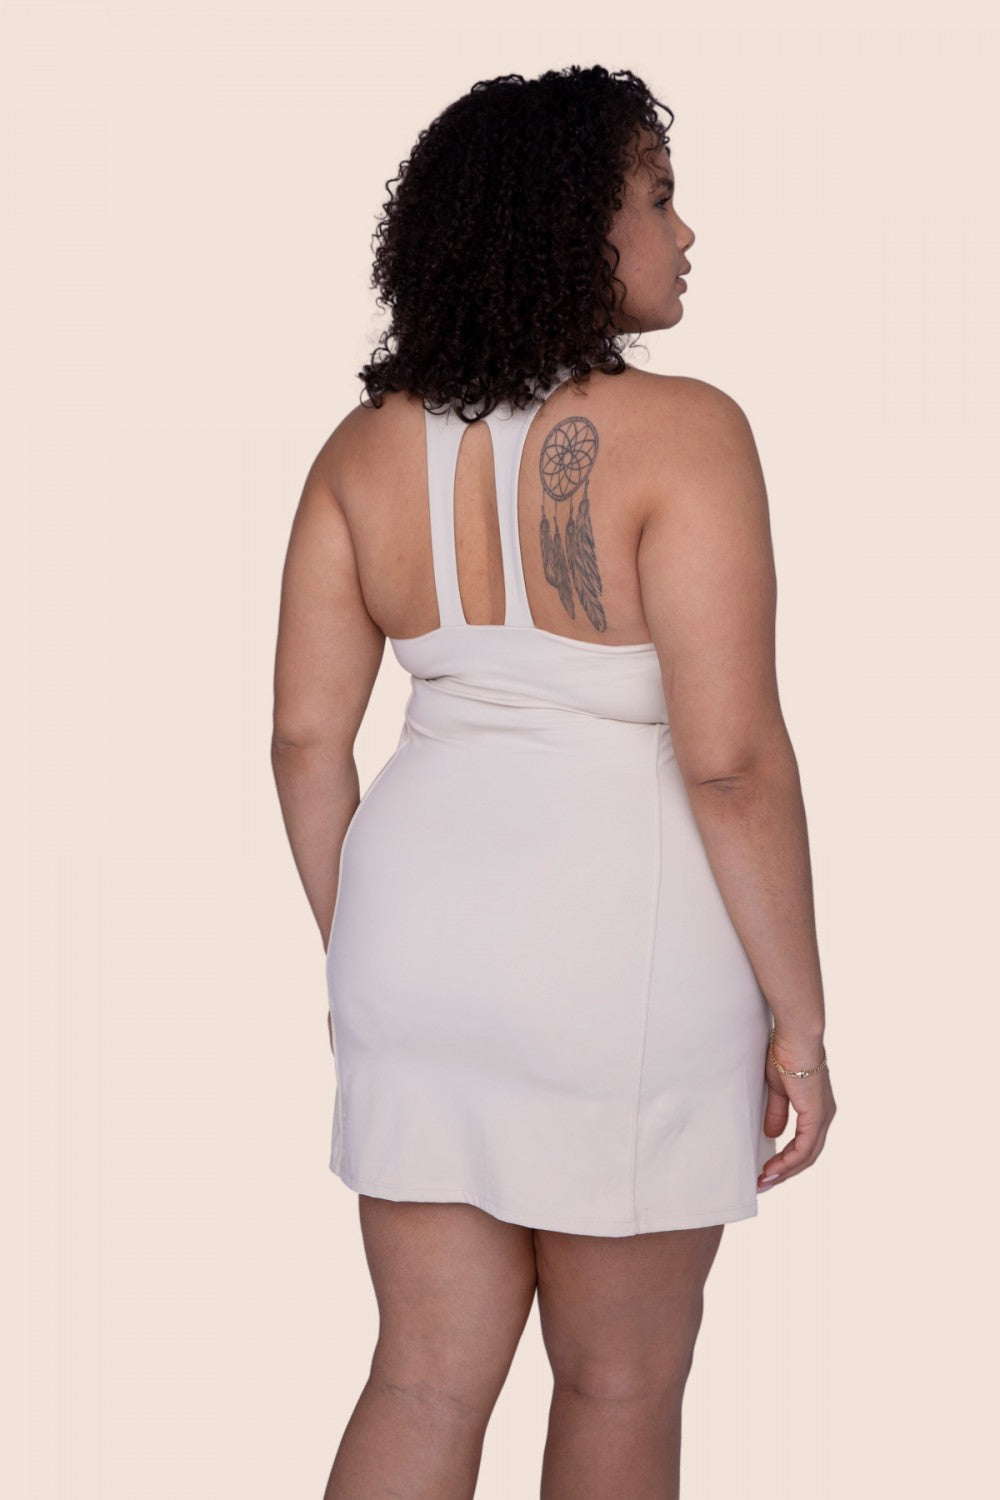 Twin Strap Active Dress by Urban Luxe Lifestyles